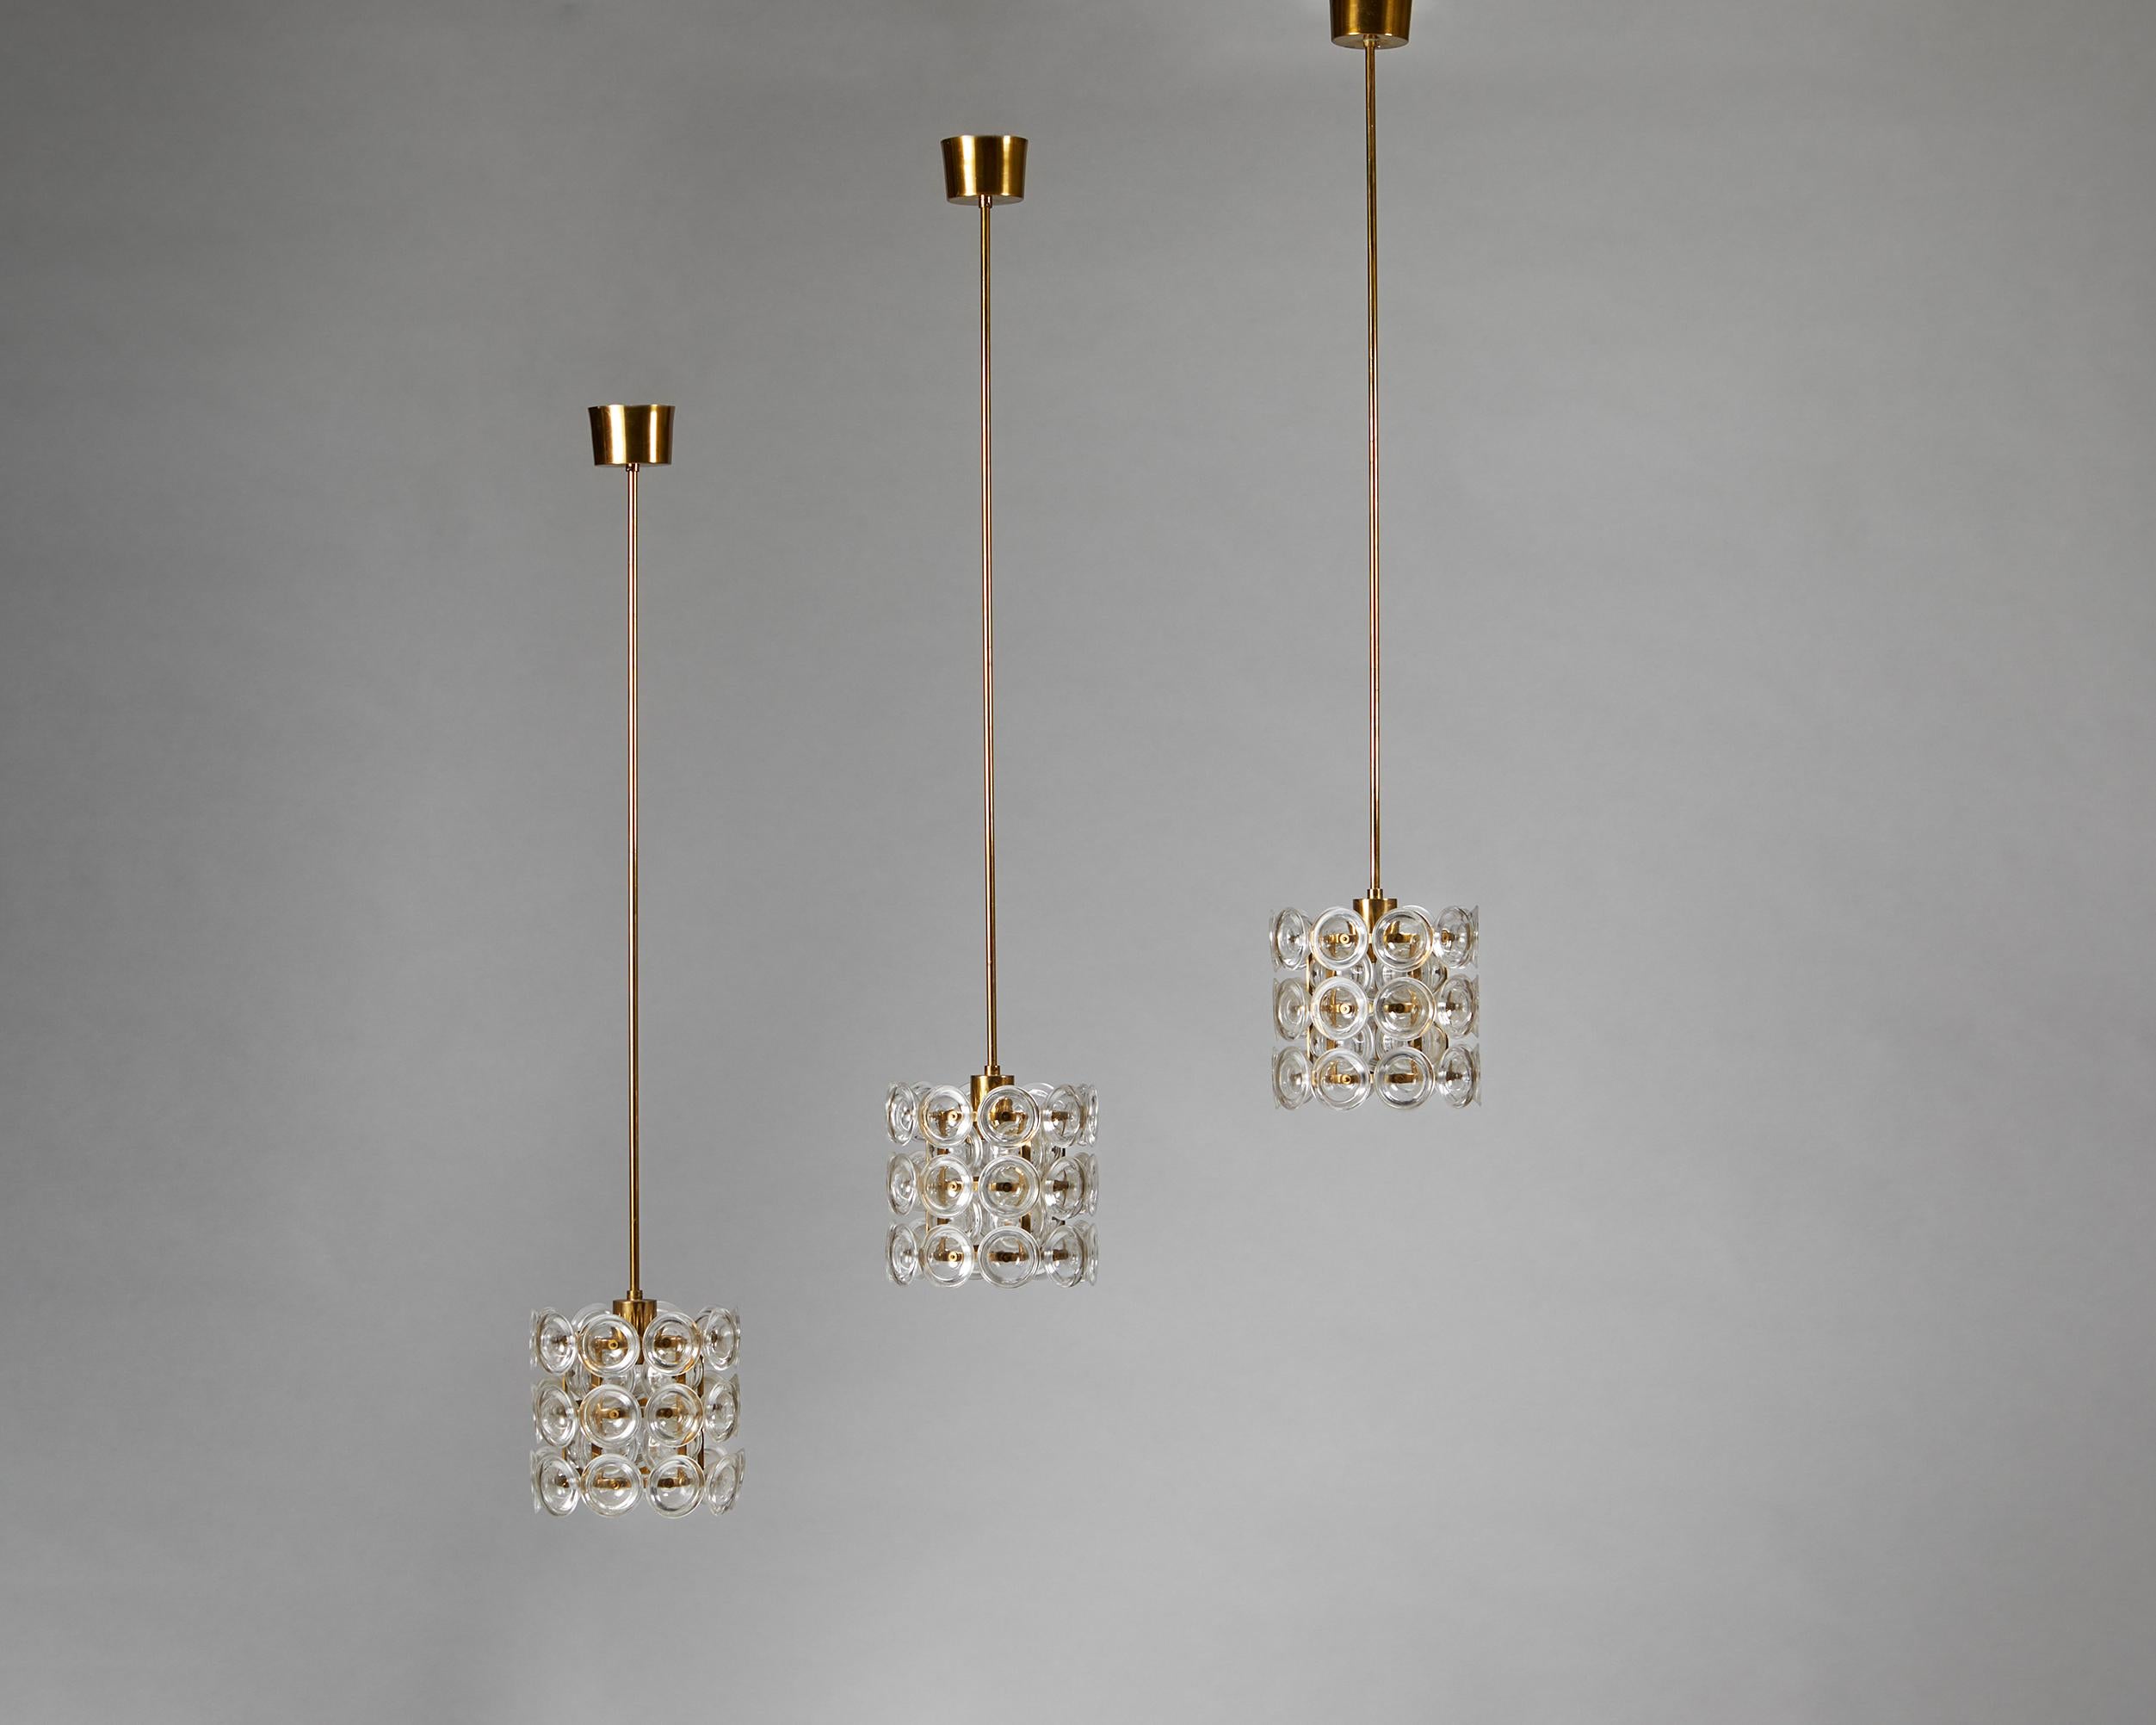 Set of three ceiling lamps designed by Carl Fagerlund for Orrefors,
Sweden, 1960's.
Brass and crystal.

These impressive ceiling lamps have two layers of circular glass cups cleverly aligned to protect the eyes from direct light. The inner and outer